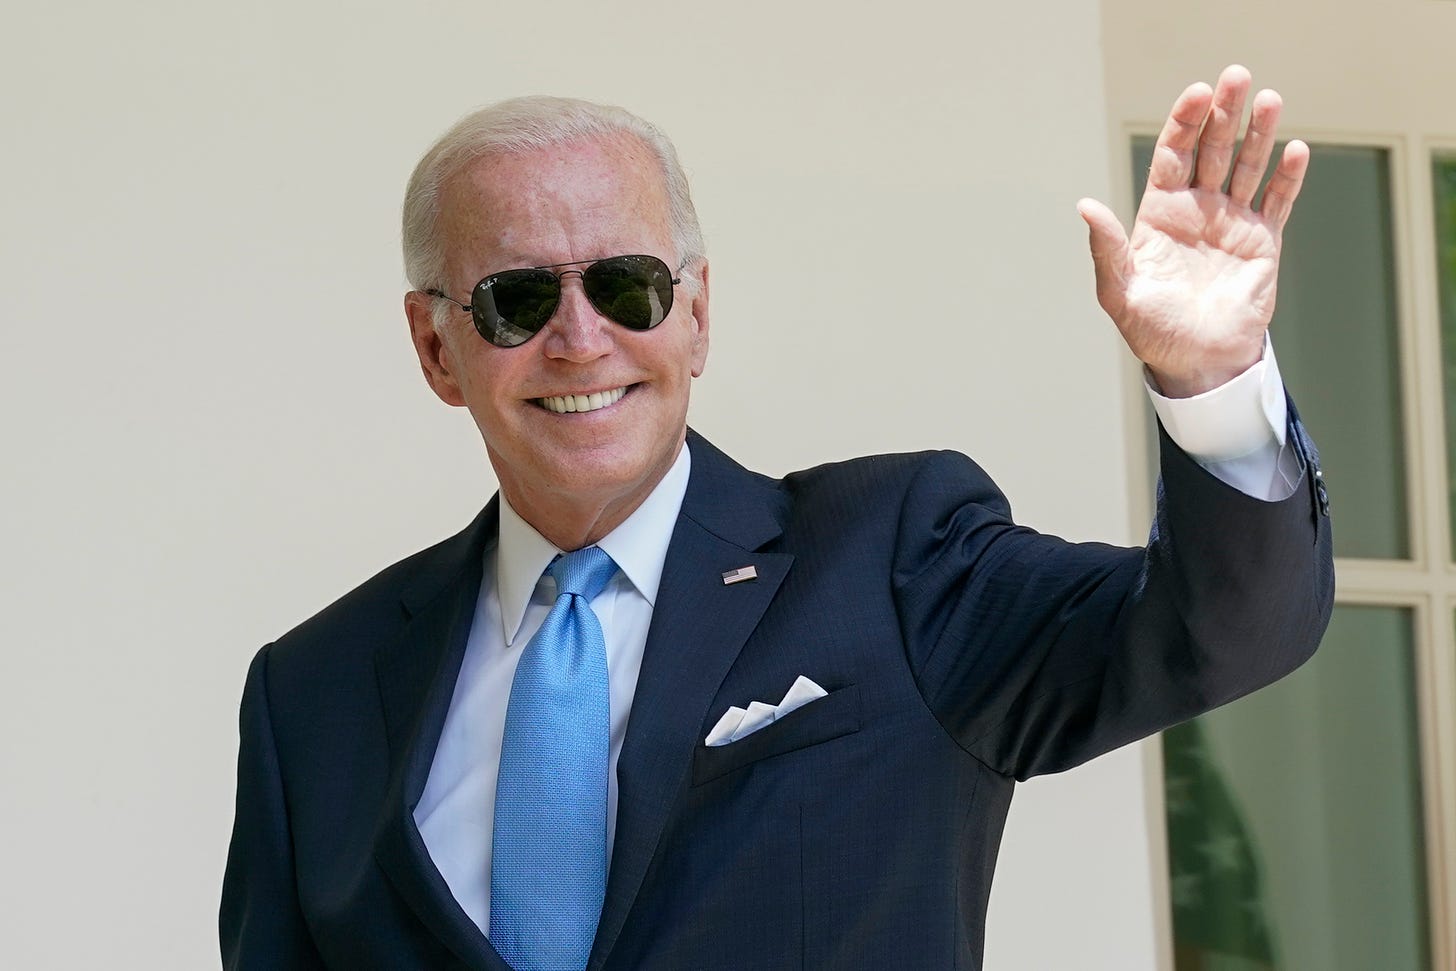 Biden enters the Always Be Closing phase of his first term - POLITICO